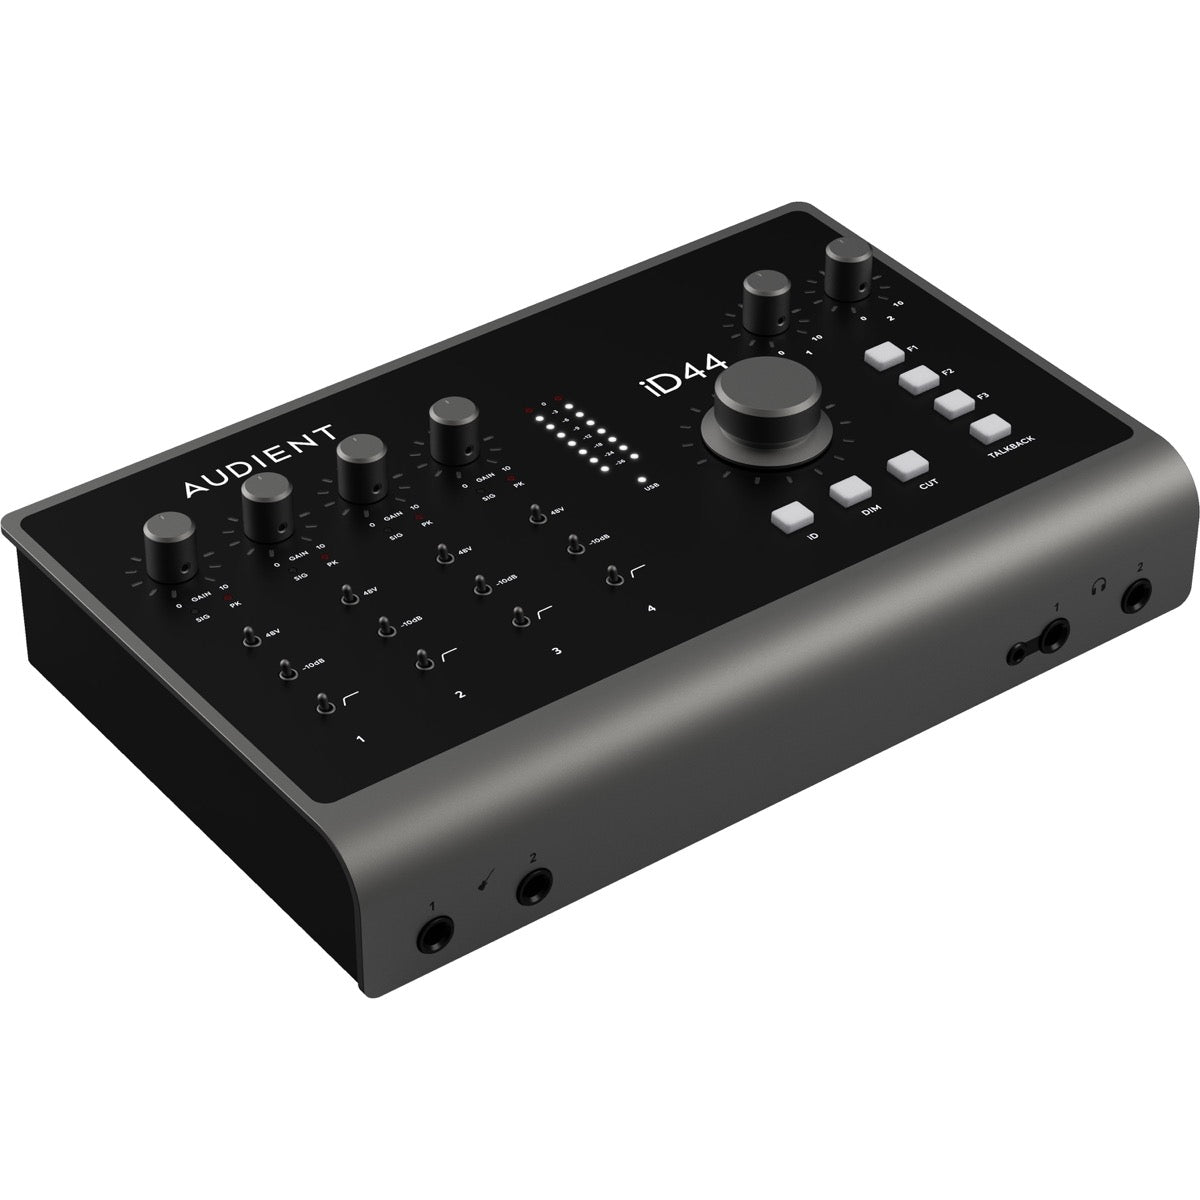 Audient iD44 MkII 20in/24out USB-C Audio Interface View 1